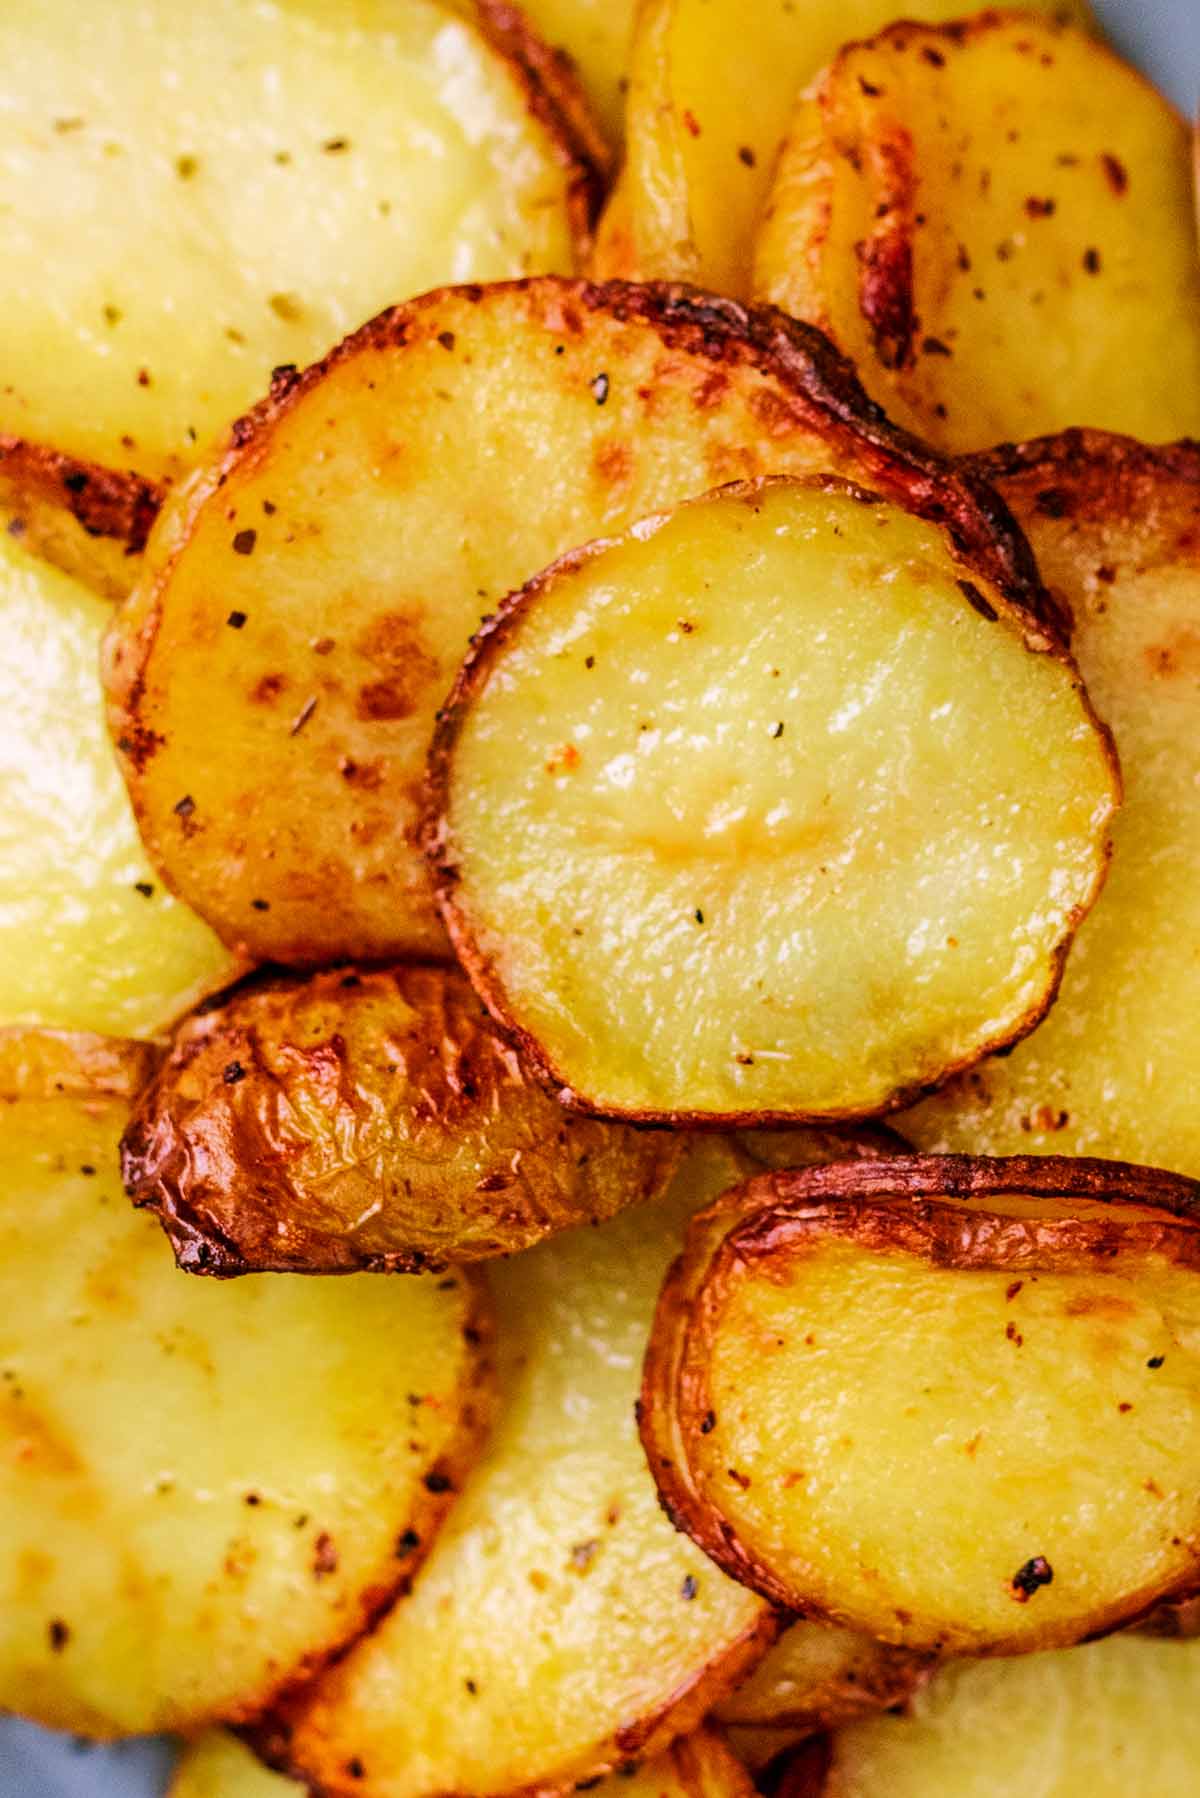 Thin cooked potato slices with slightly blackened edges.